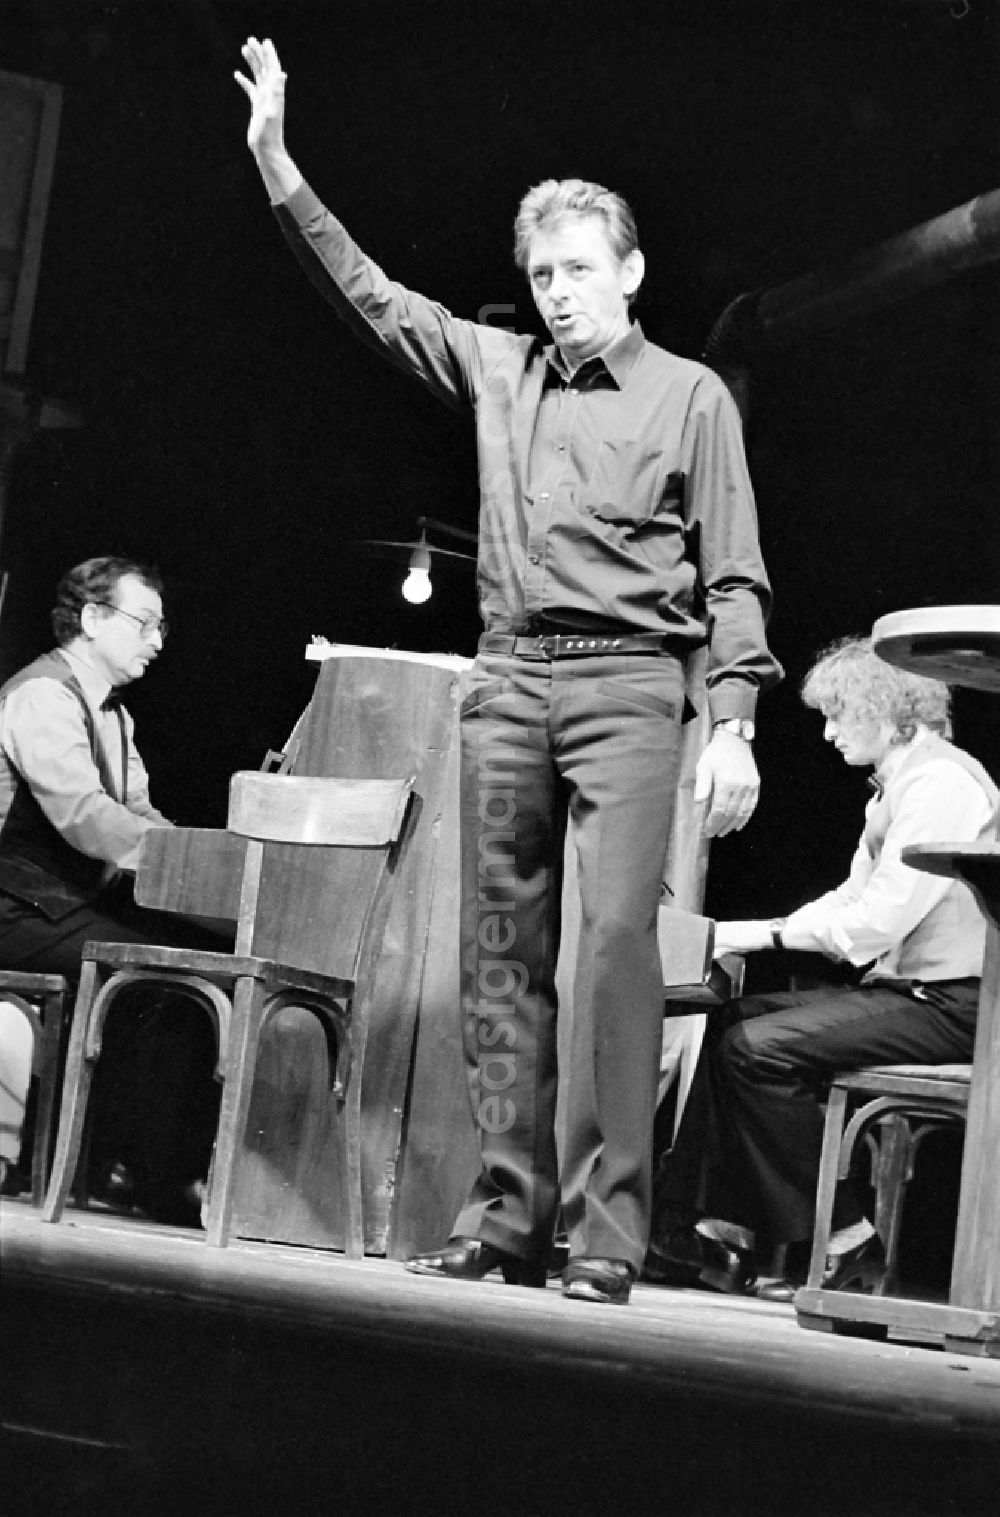 GDR image archive: Berlin - German Theatre Berlin - Berlin Songs From Then And Yesterday. Actors / actresses and performers in a theatre - scene and stage set in the Mitte district of Berlin, the former capital of the GDR, German Democratic Republic. On stage - Rolf Ludwig in front, behind him Uwe Hilprecht and Roman Kaminski at the piano (from left)